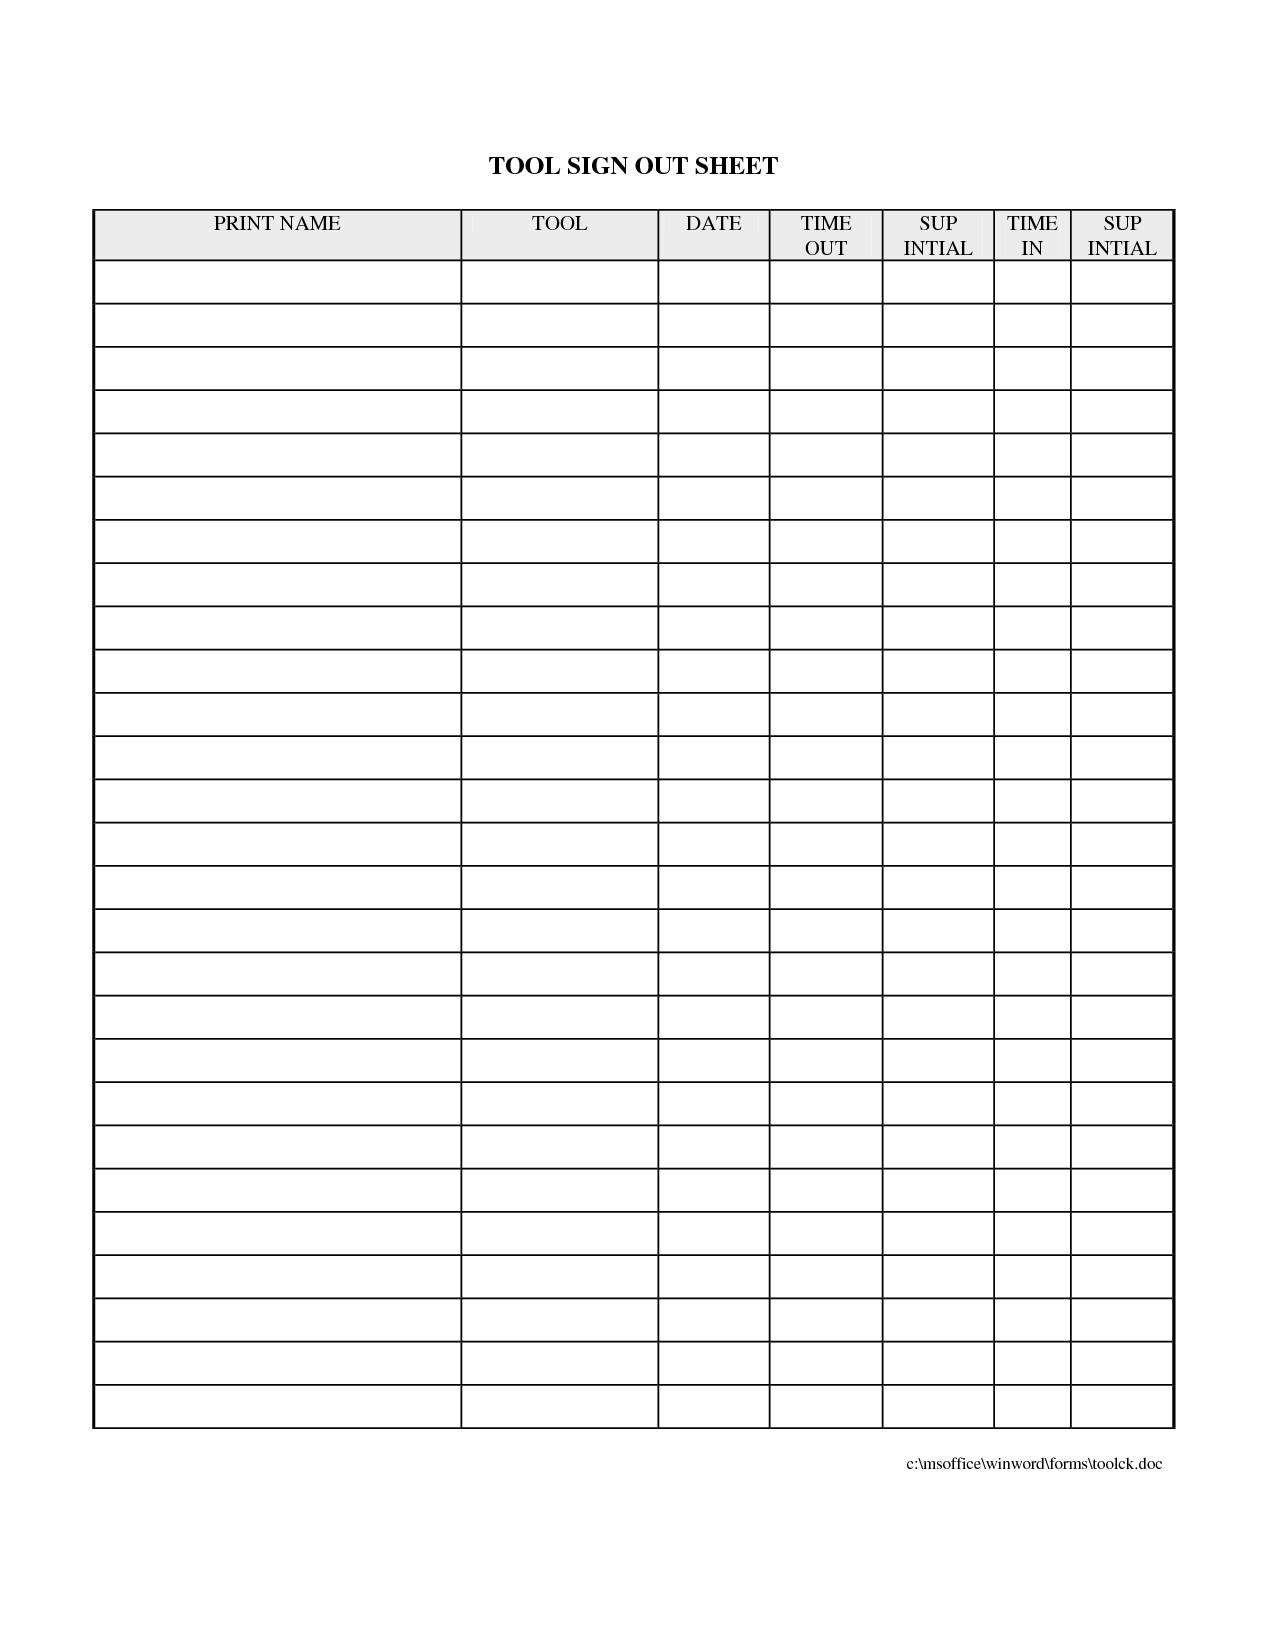 Equipment Checkout Log Printable Sign Out Sheet Template